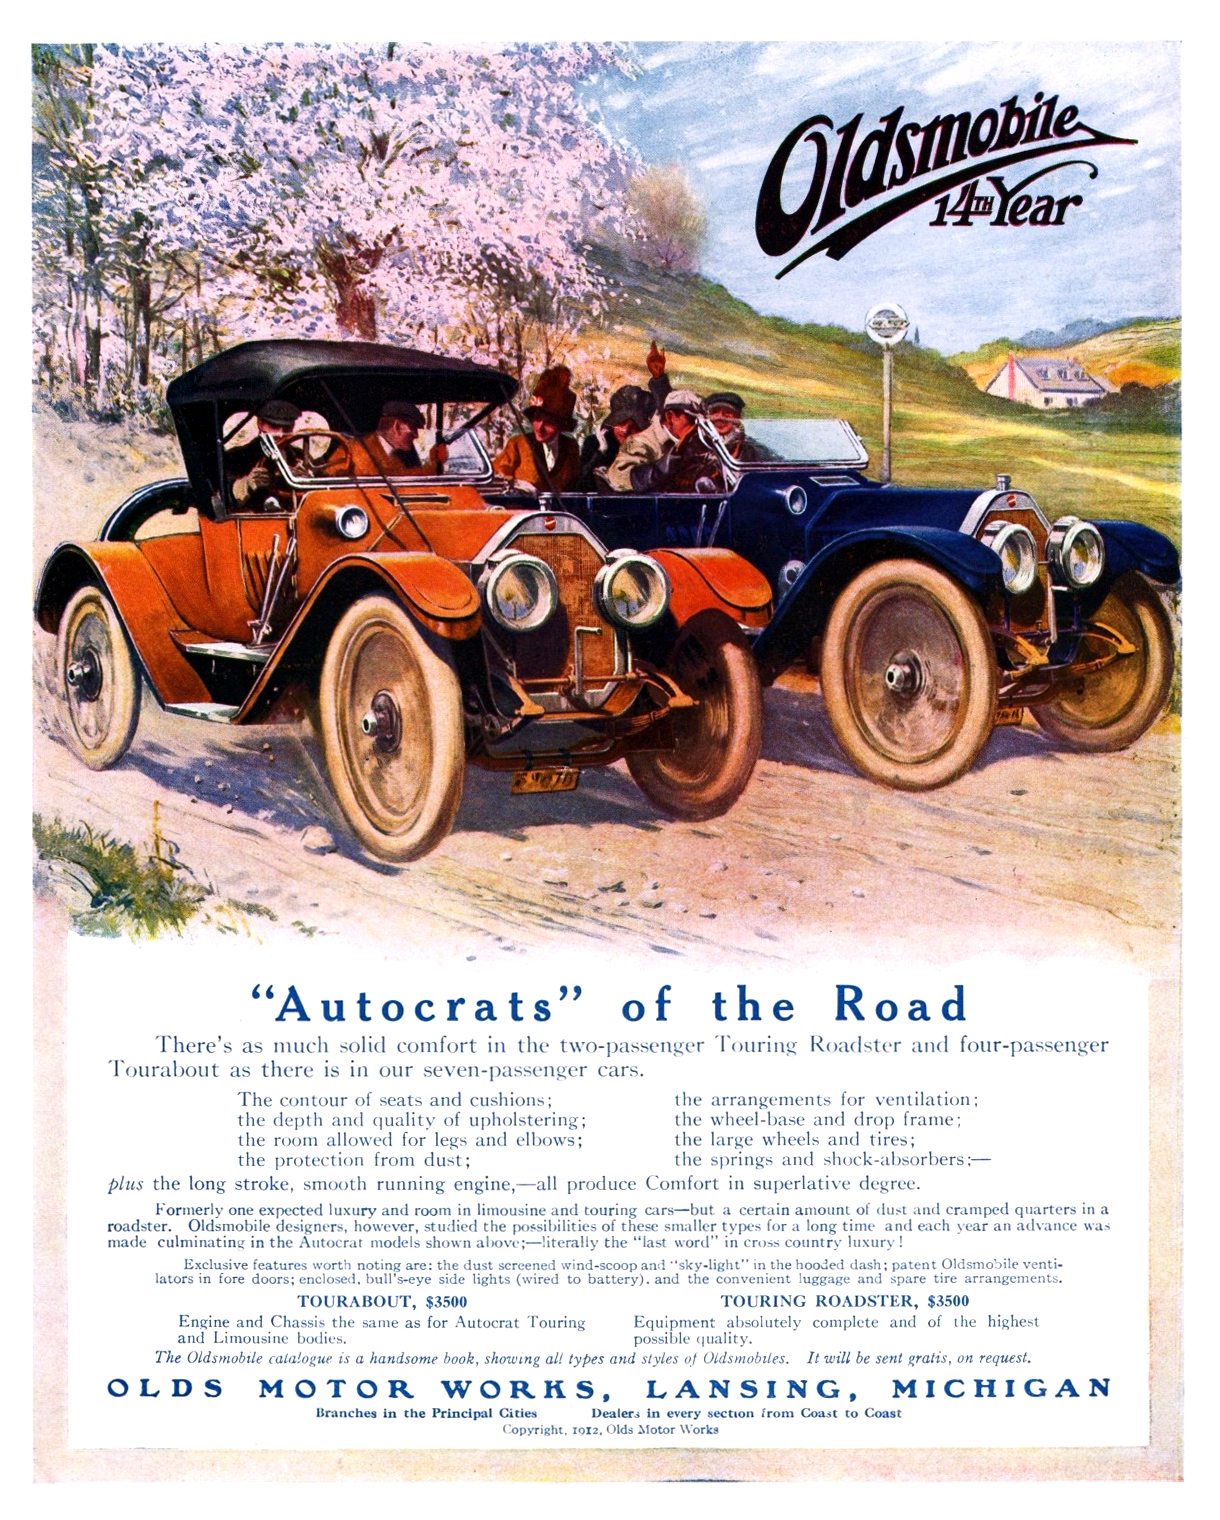 Oldsmobile Autocrat Touring Roadster and Tourabout Ad (March, 1912): 'Autocrats' of the Road